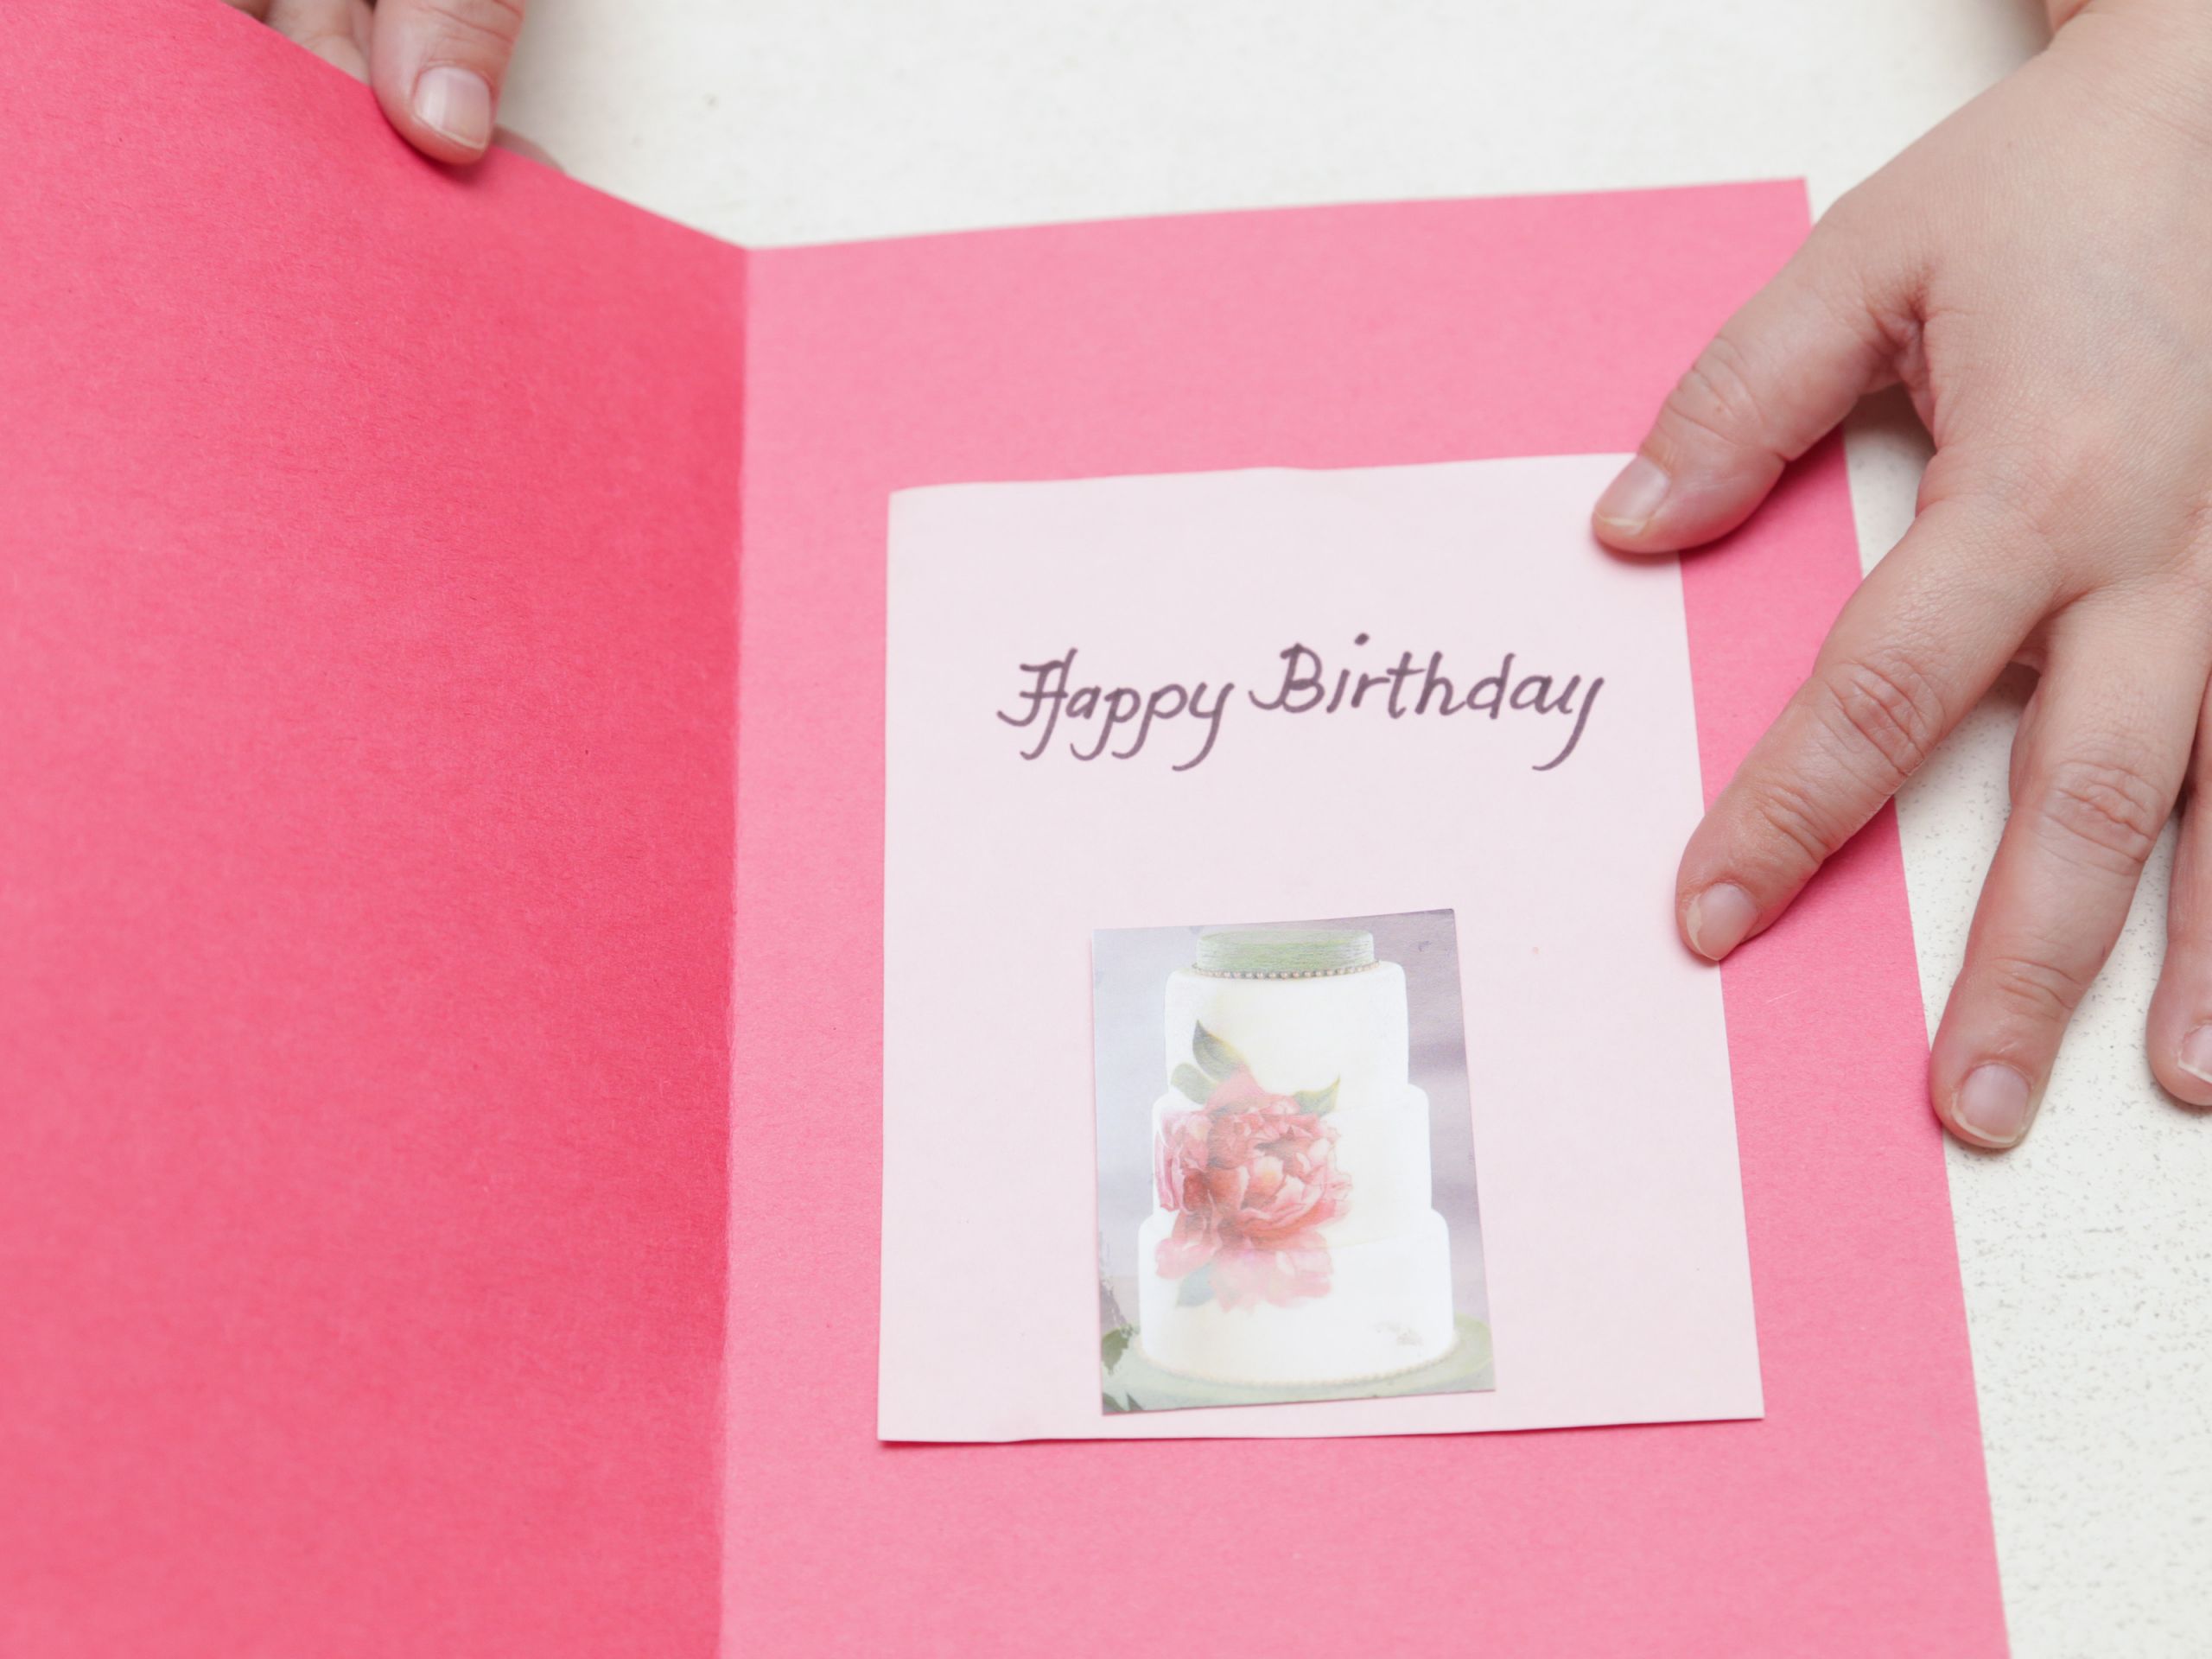 Birthday Cards To Make
 4 Ways to Make a Simple Birthday Card at Home wikiHow